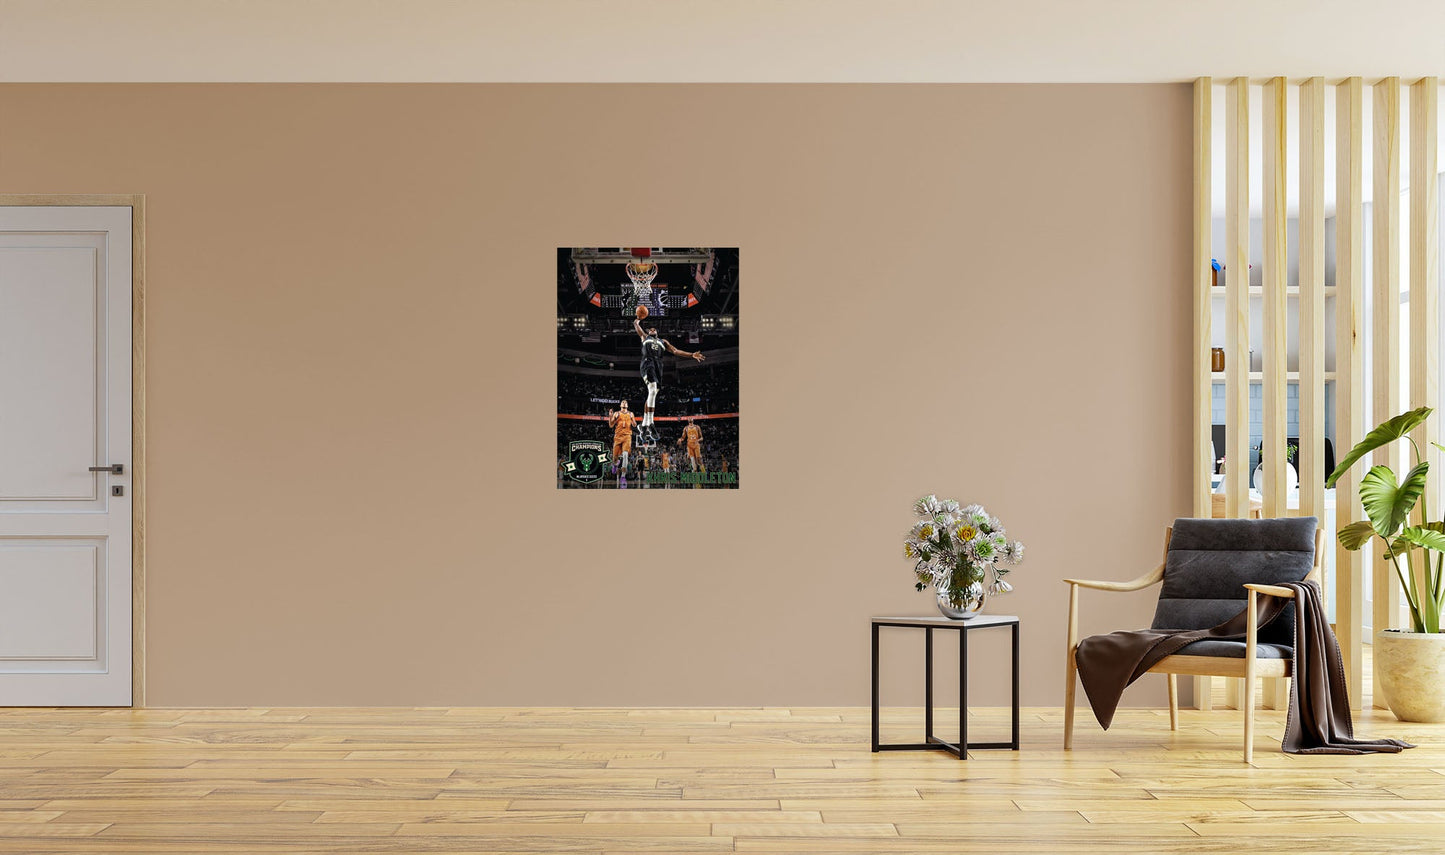 Milwaukee Bucks: Khris Middleton 2021 Finals Dunk Mural        - Officially Licensed NBA Removable Wall   Adhesive Decal